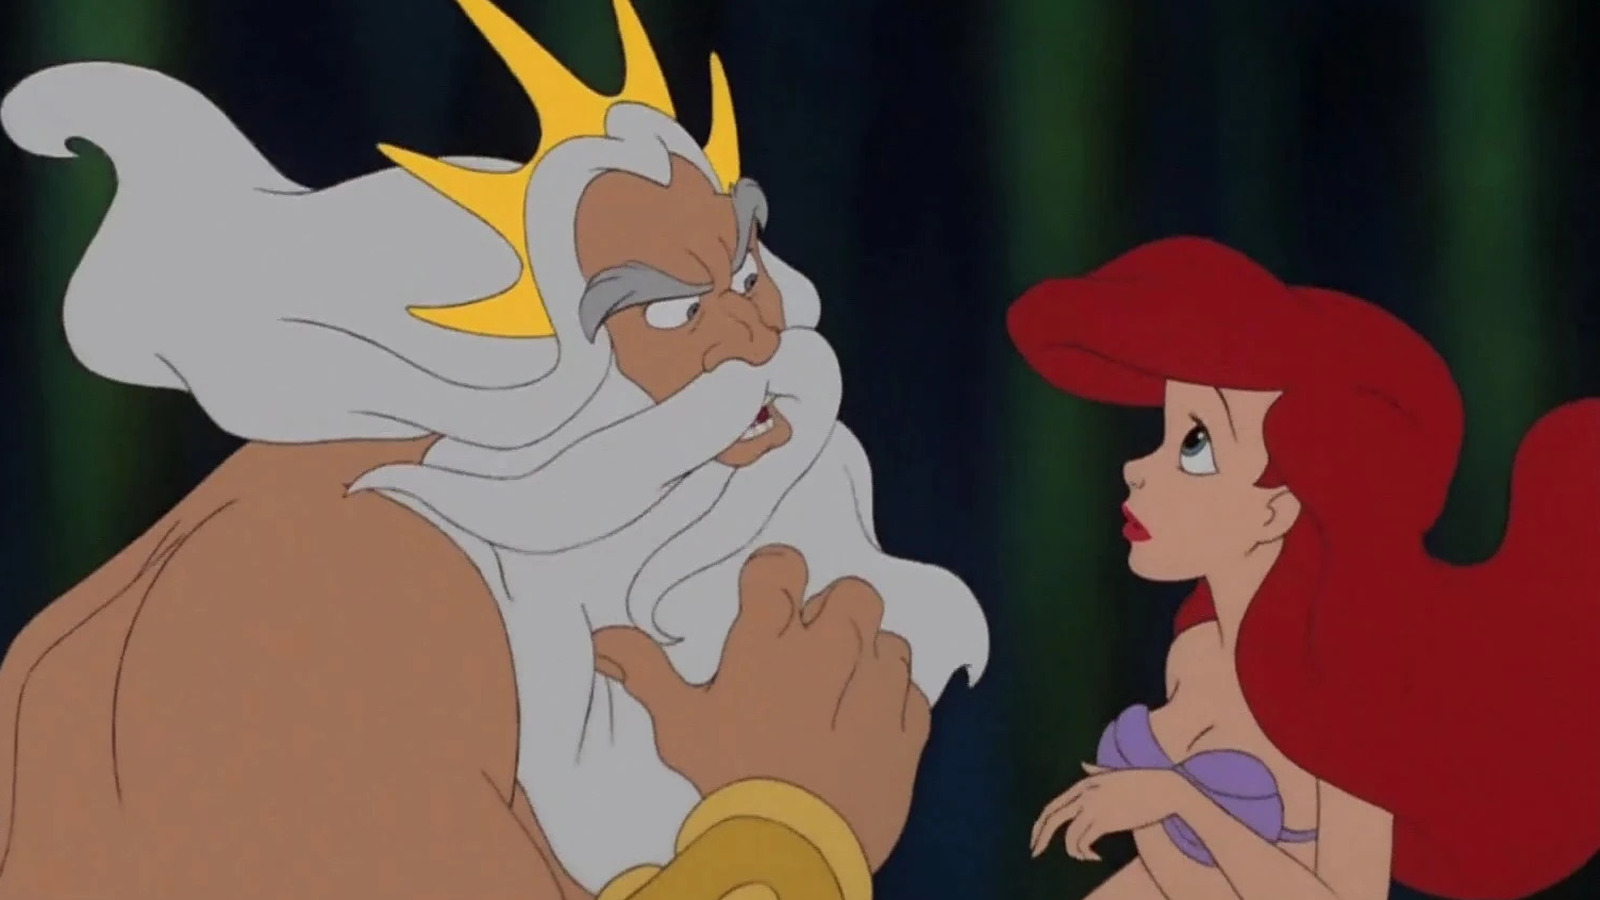 How the Little Mermaid changes King Triton from the original movie